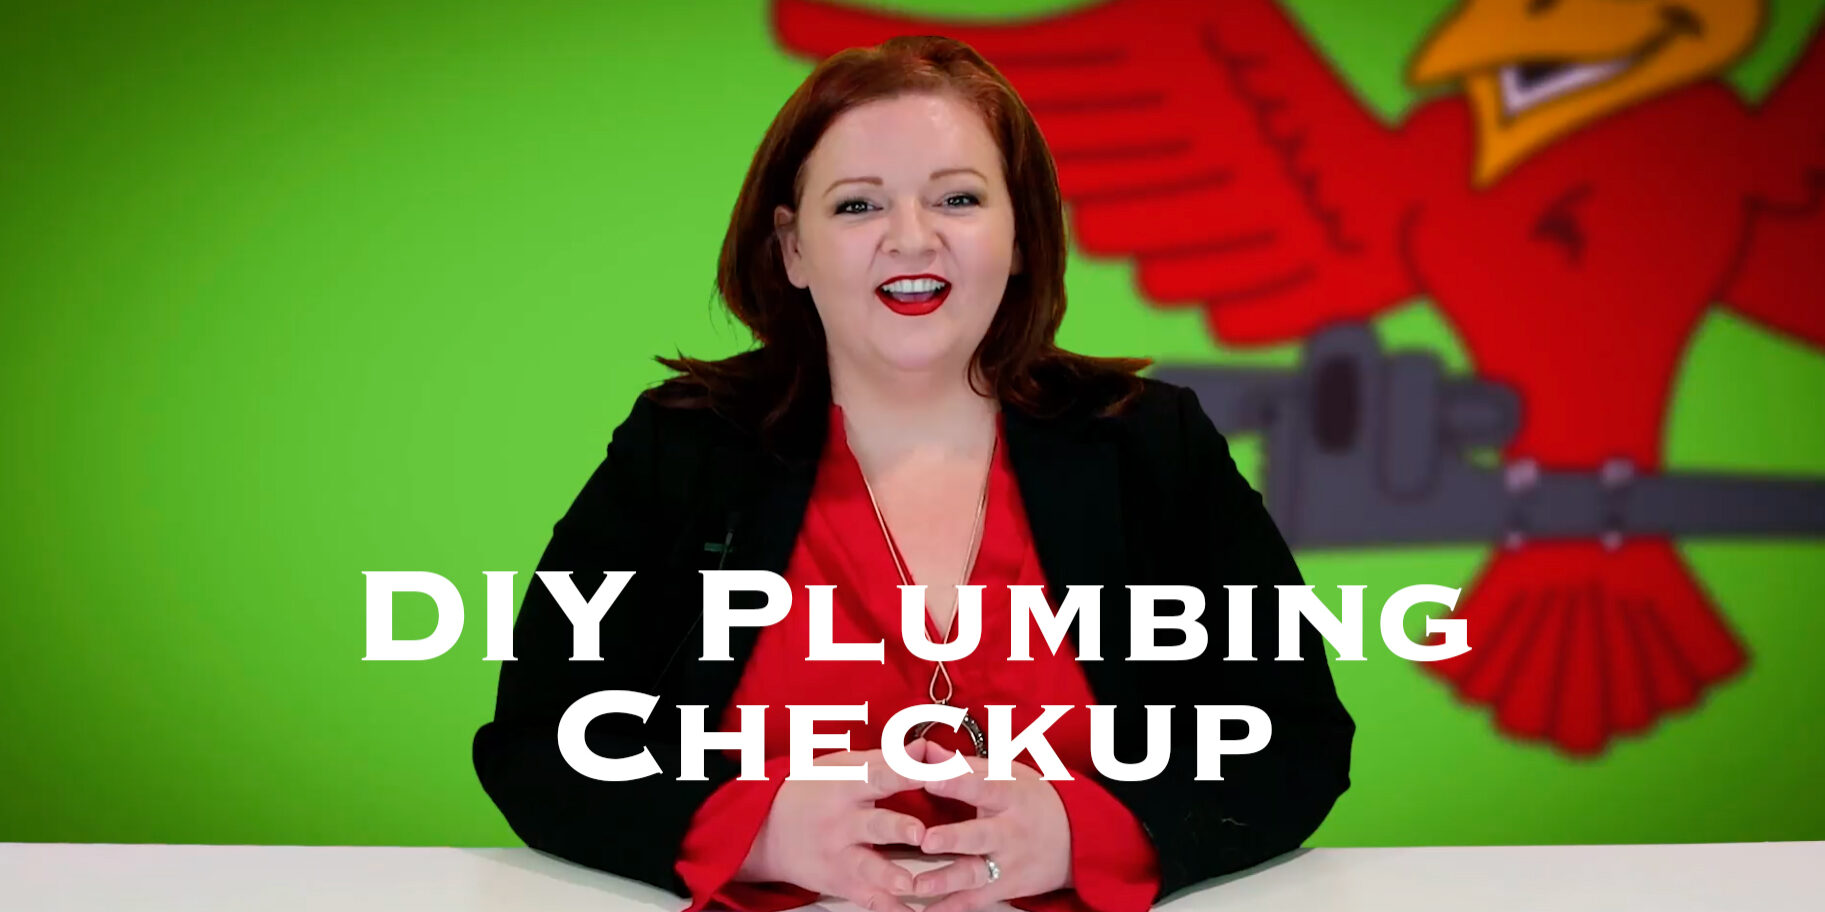 Cover photo for blog and video "DIY Plumbing Checkup"